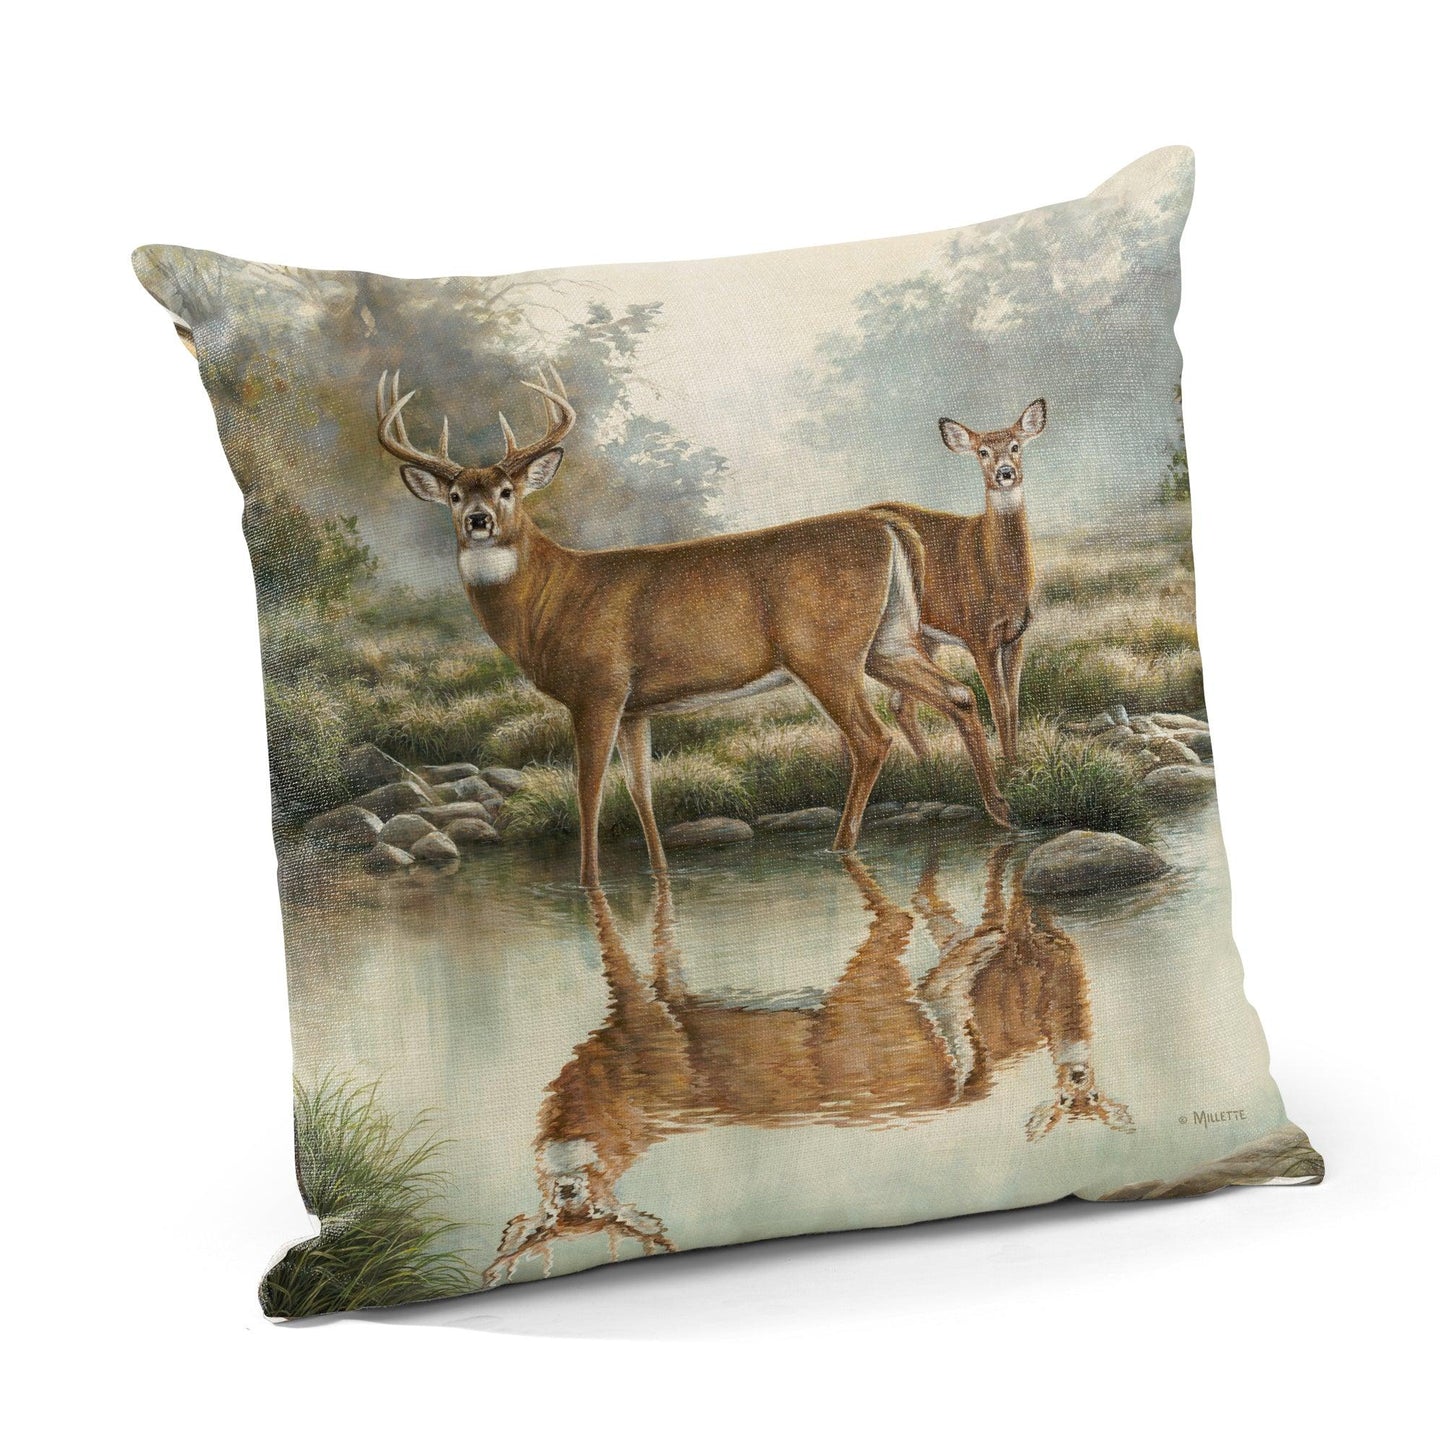 Tranquil Waters - Whitetail Deer 18" Decorative Pillow - Wild Wings